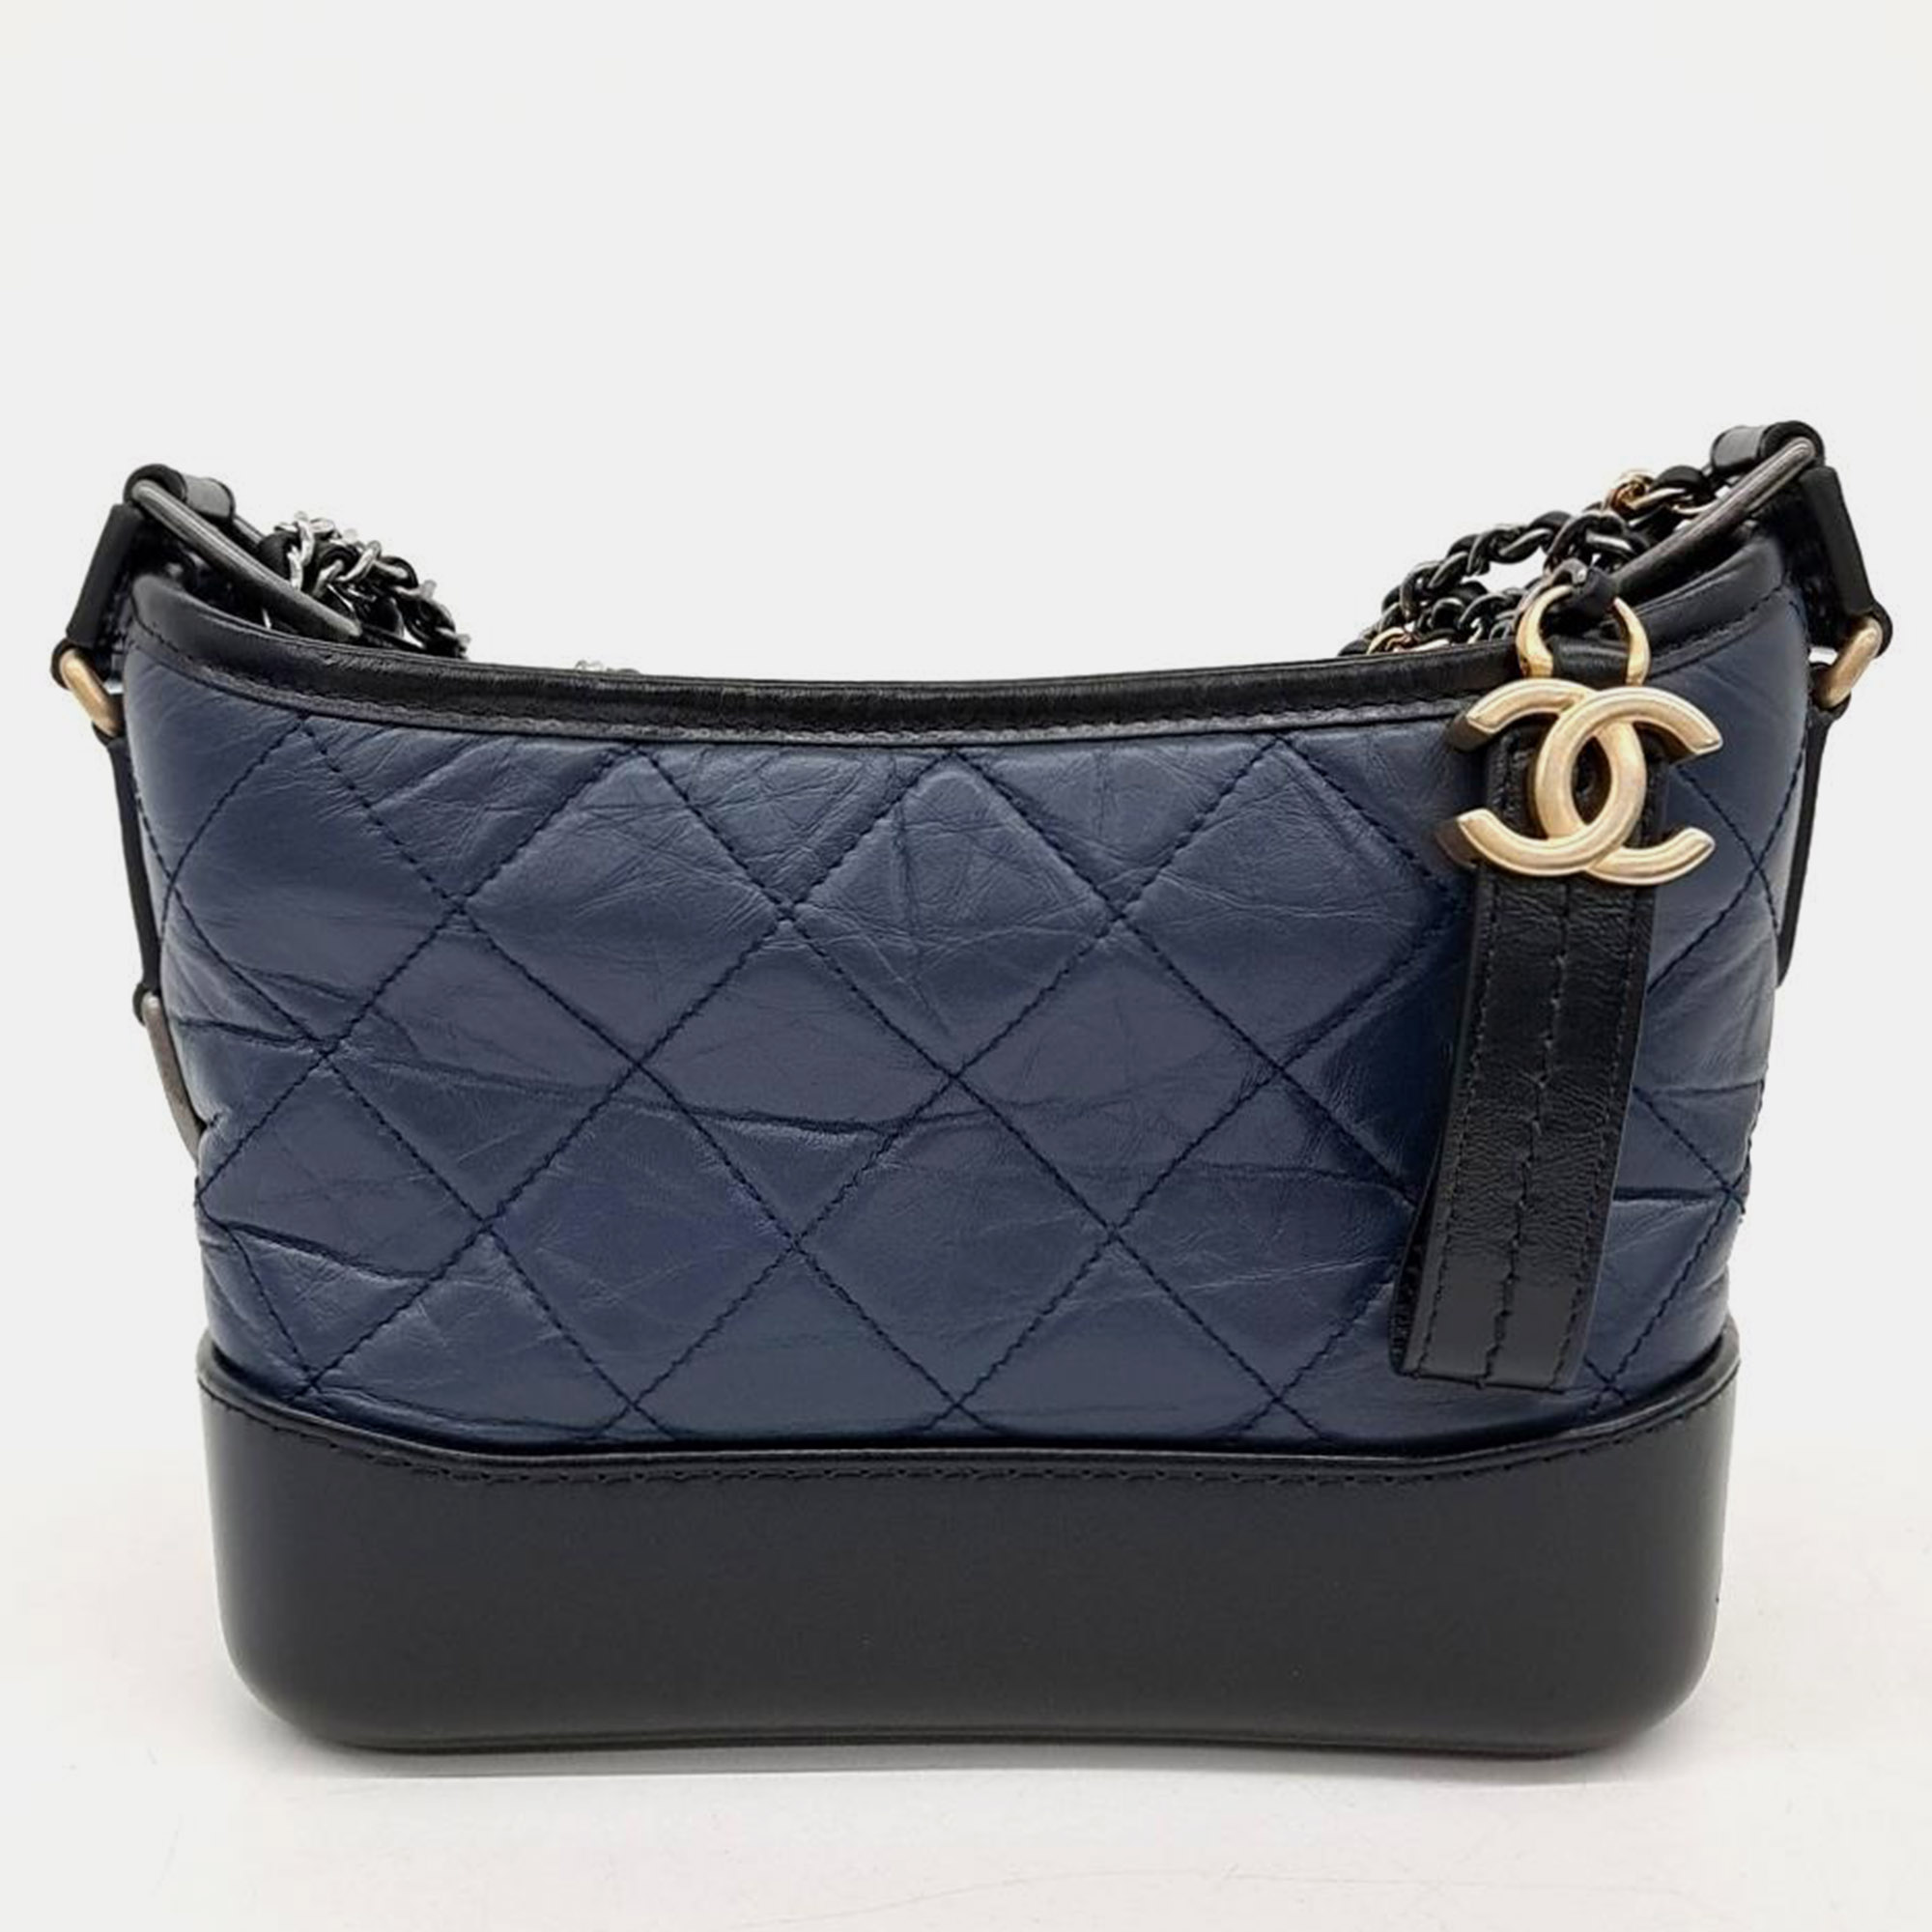 

Chanel Gabrielle Hobo Small Bag, Navy blue